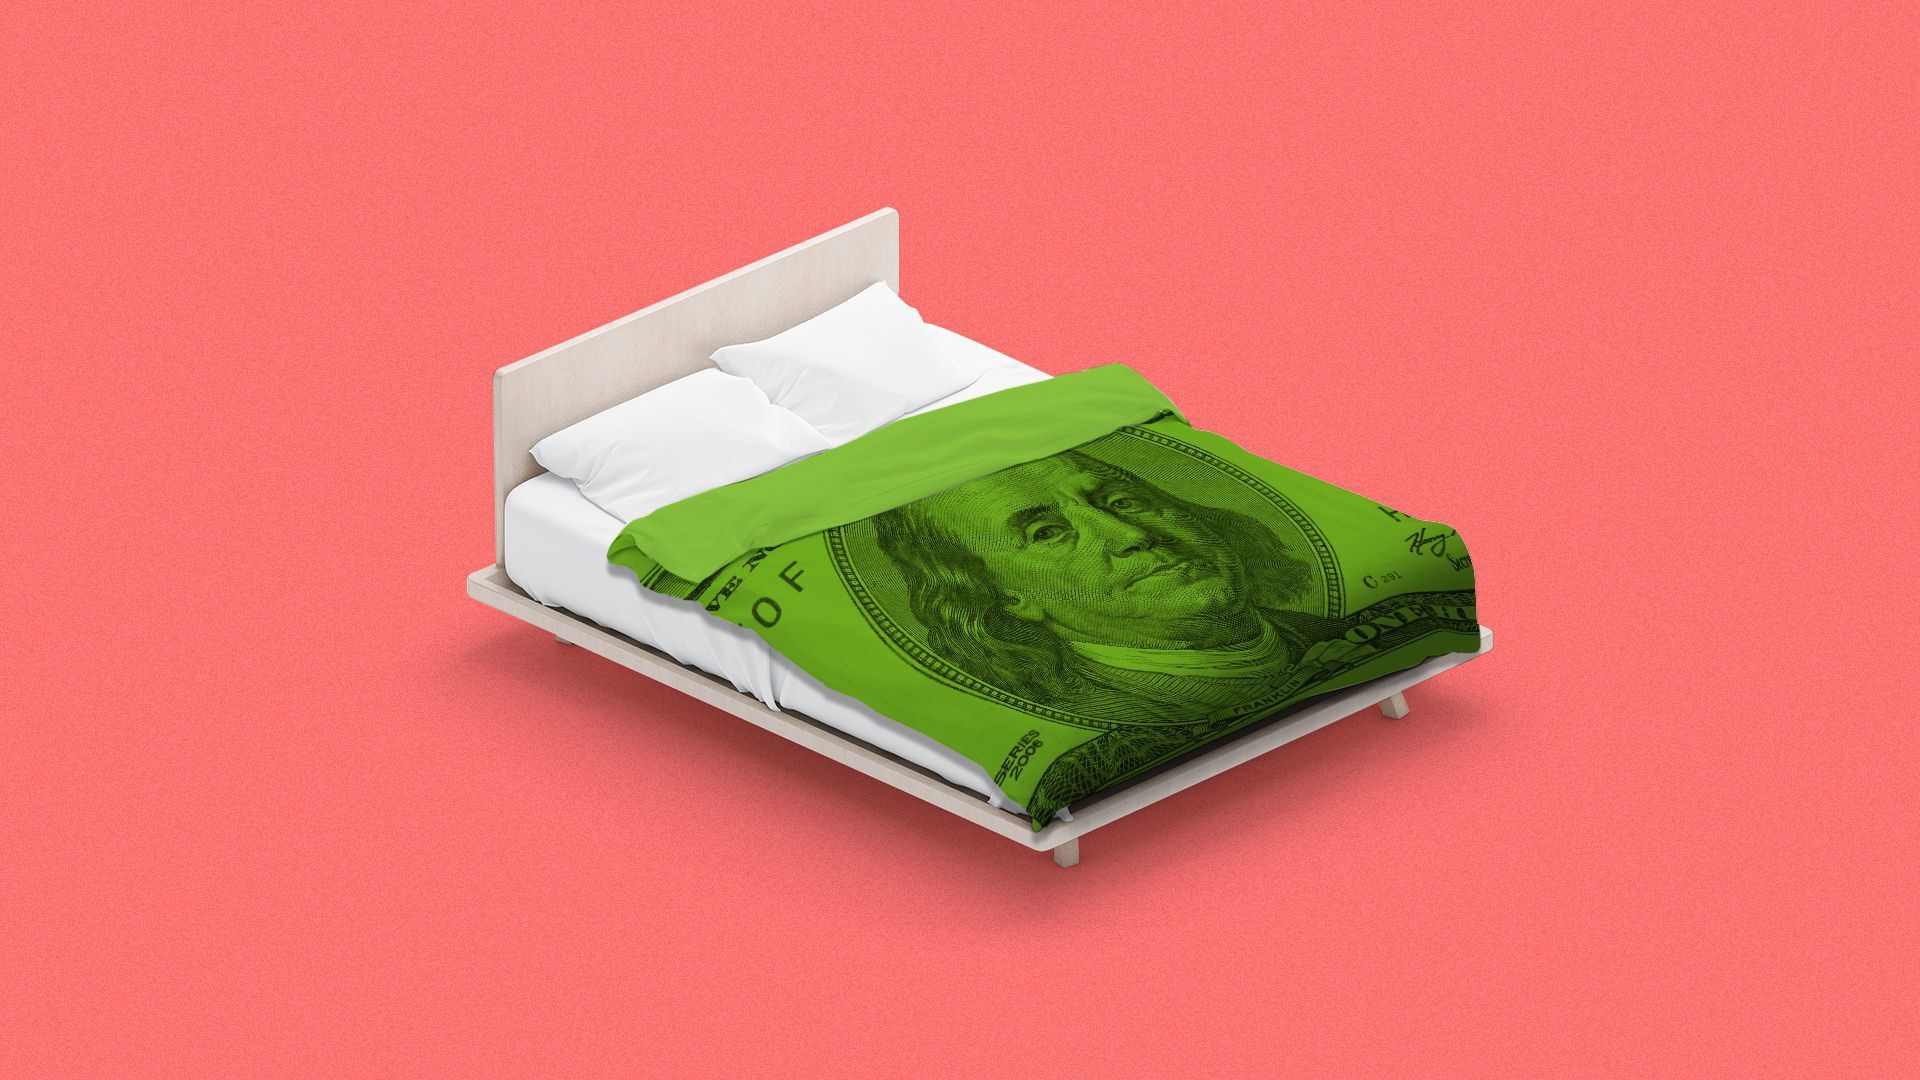 Illustration of a $100 bill used as a blanket on a bed.